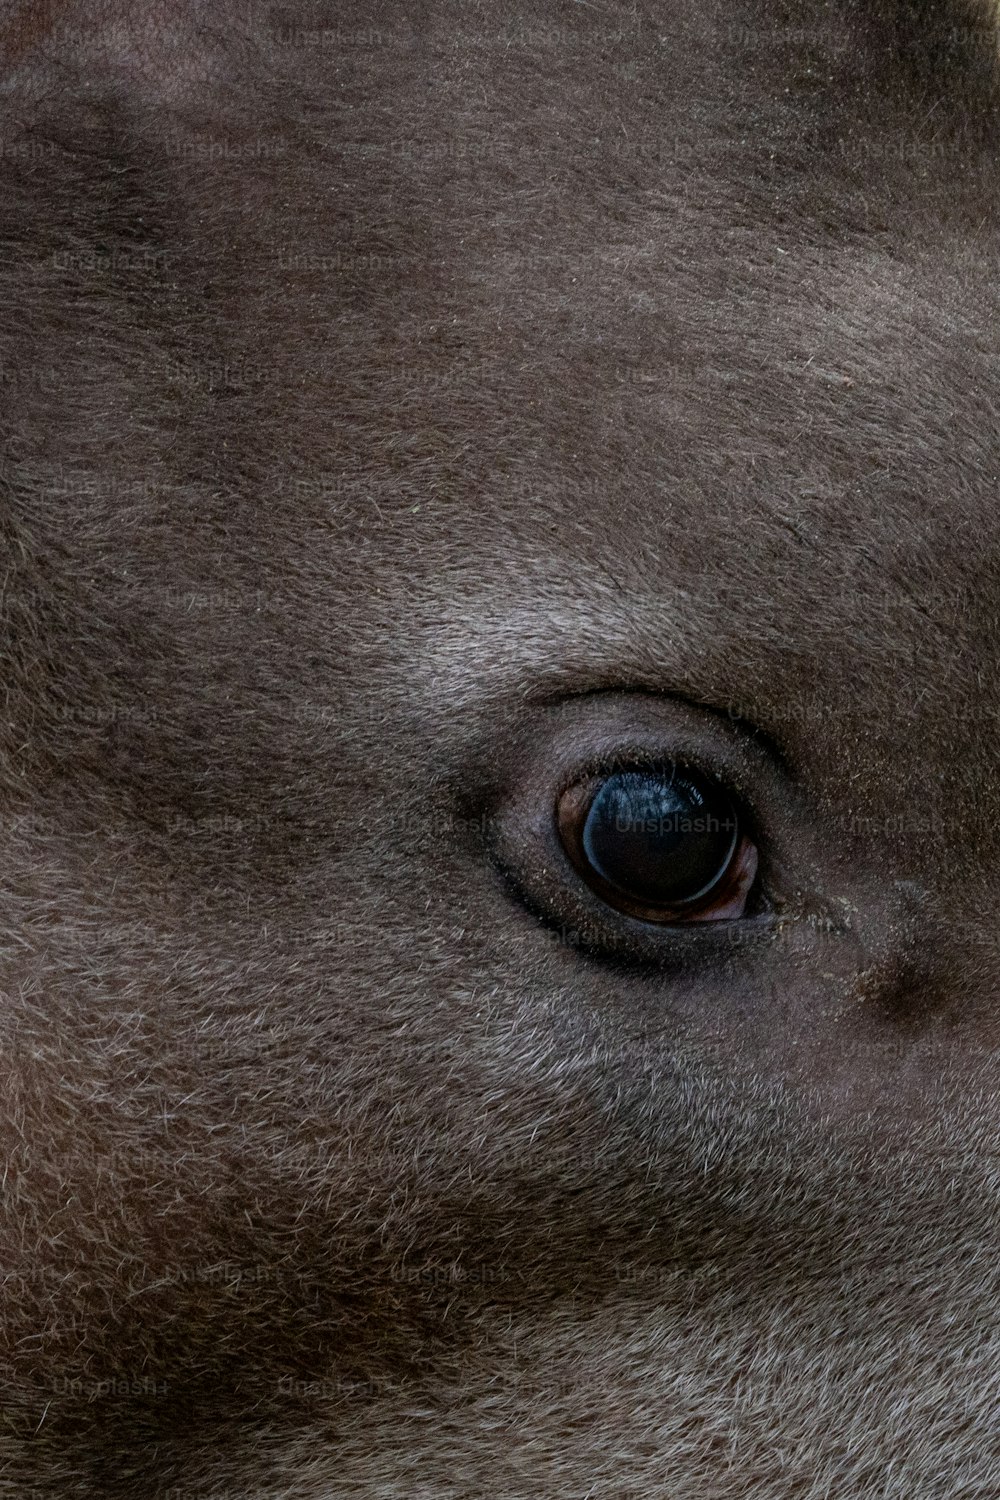 a close up of a brown animal's eye